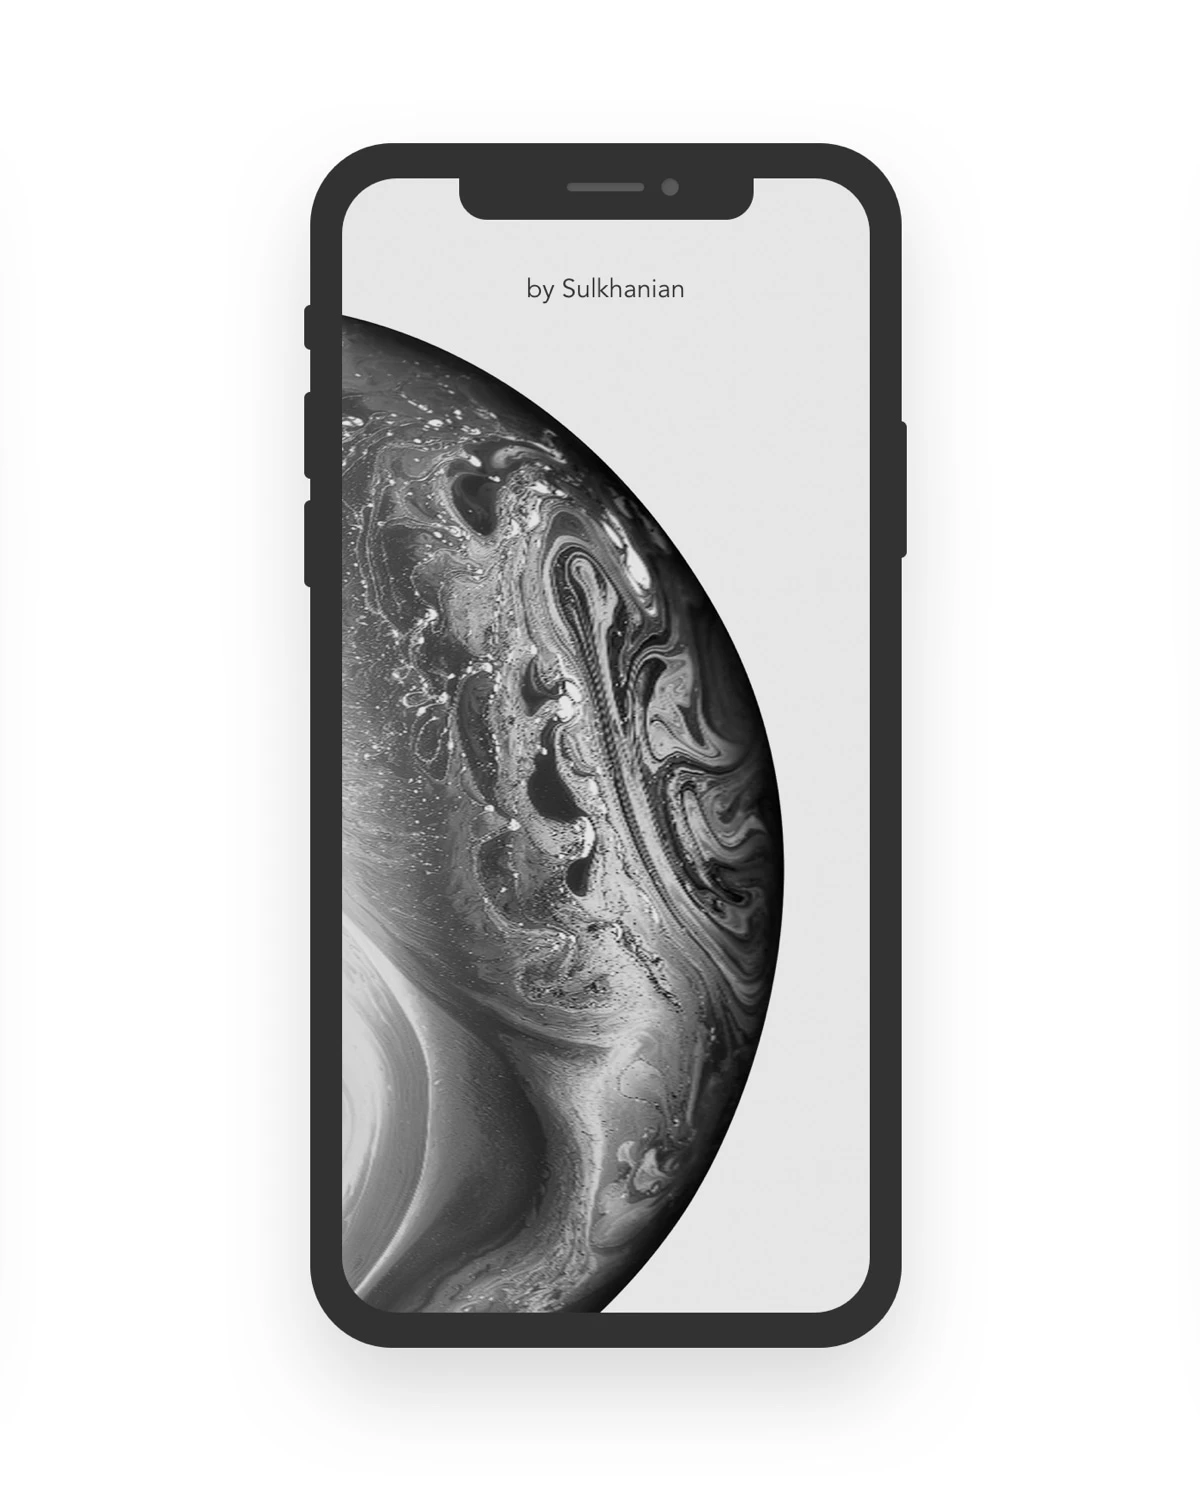 iPhone XS Super Flat Mockup - There is 3 versions: white, dark gray and dark blue